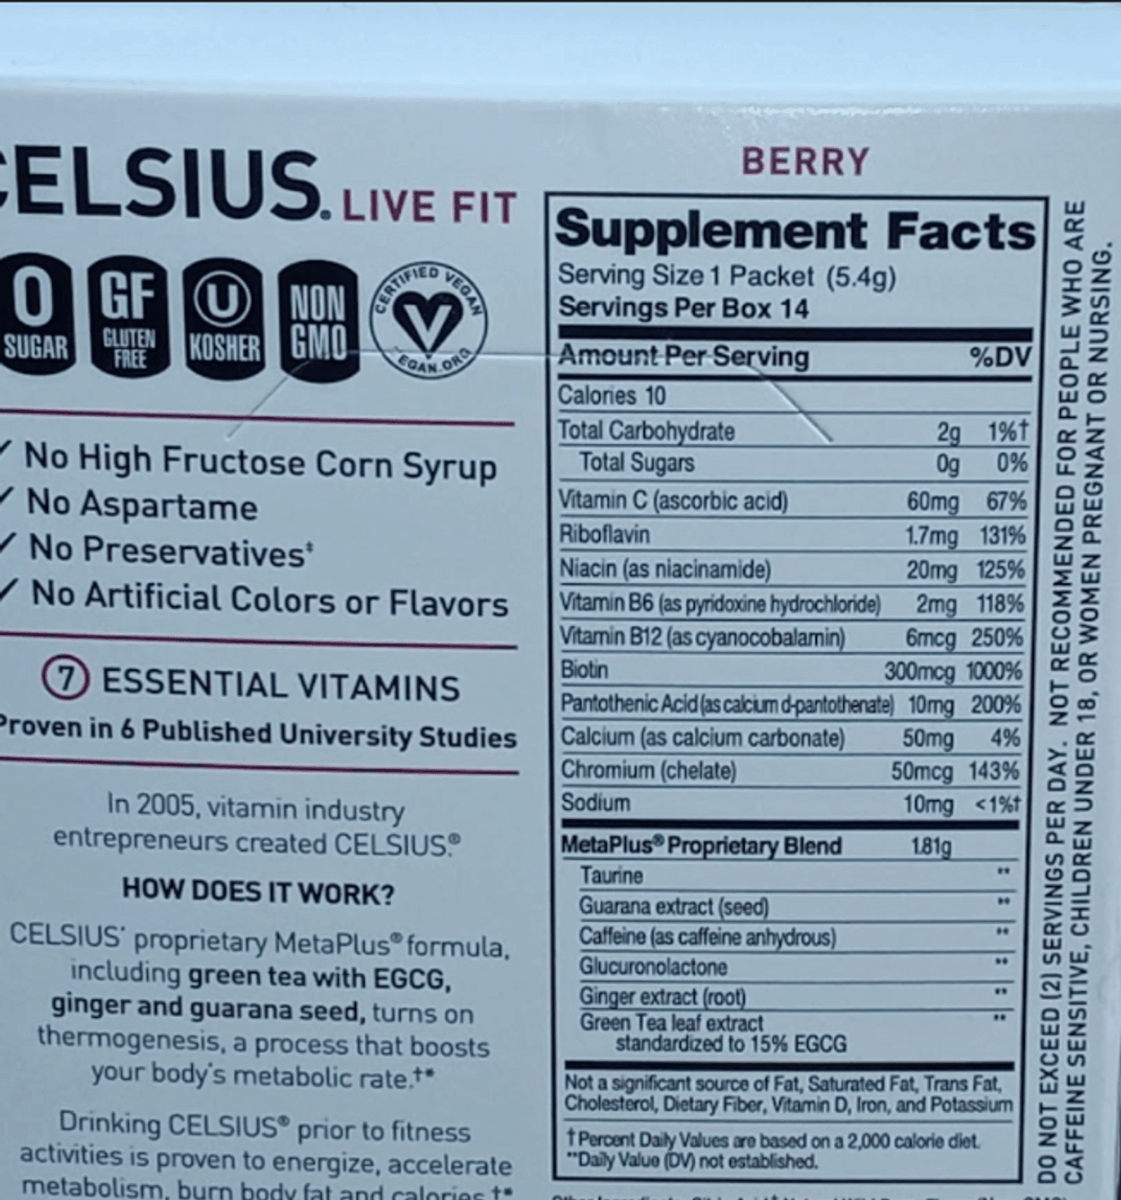 Nutrition facts of the Celsius On The Go.